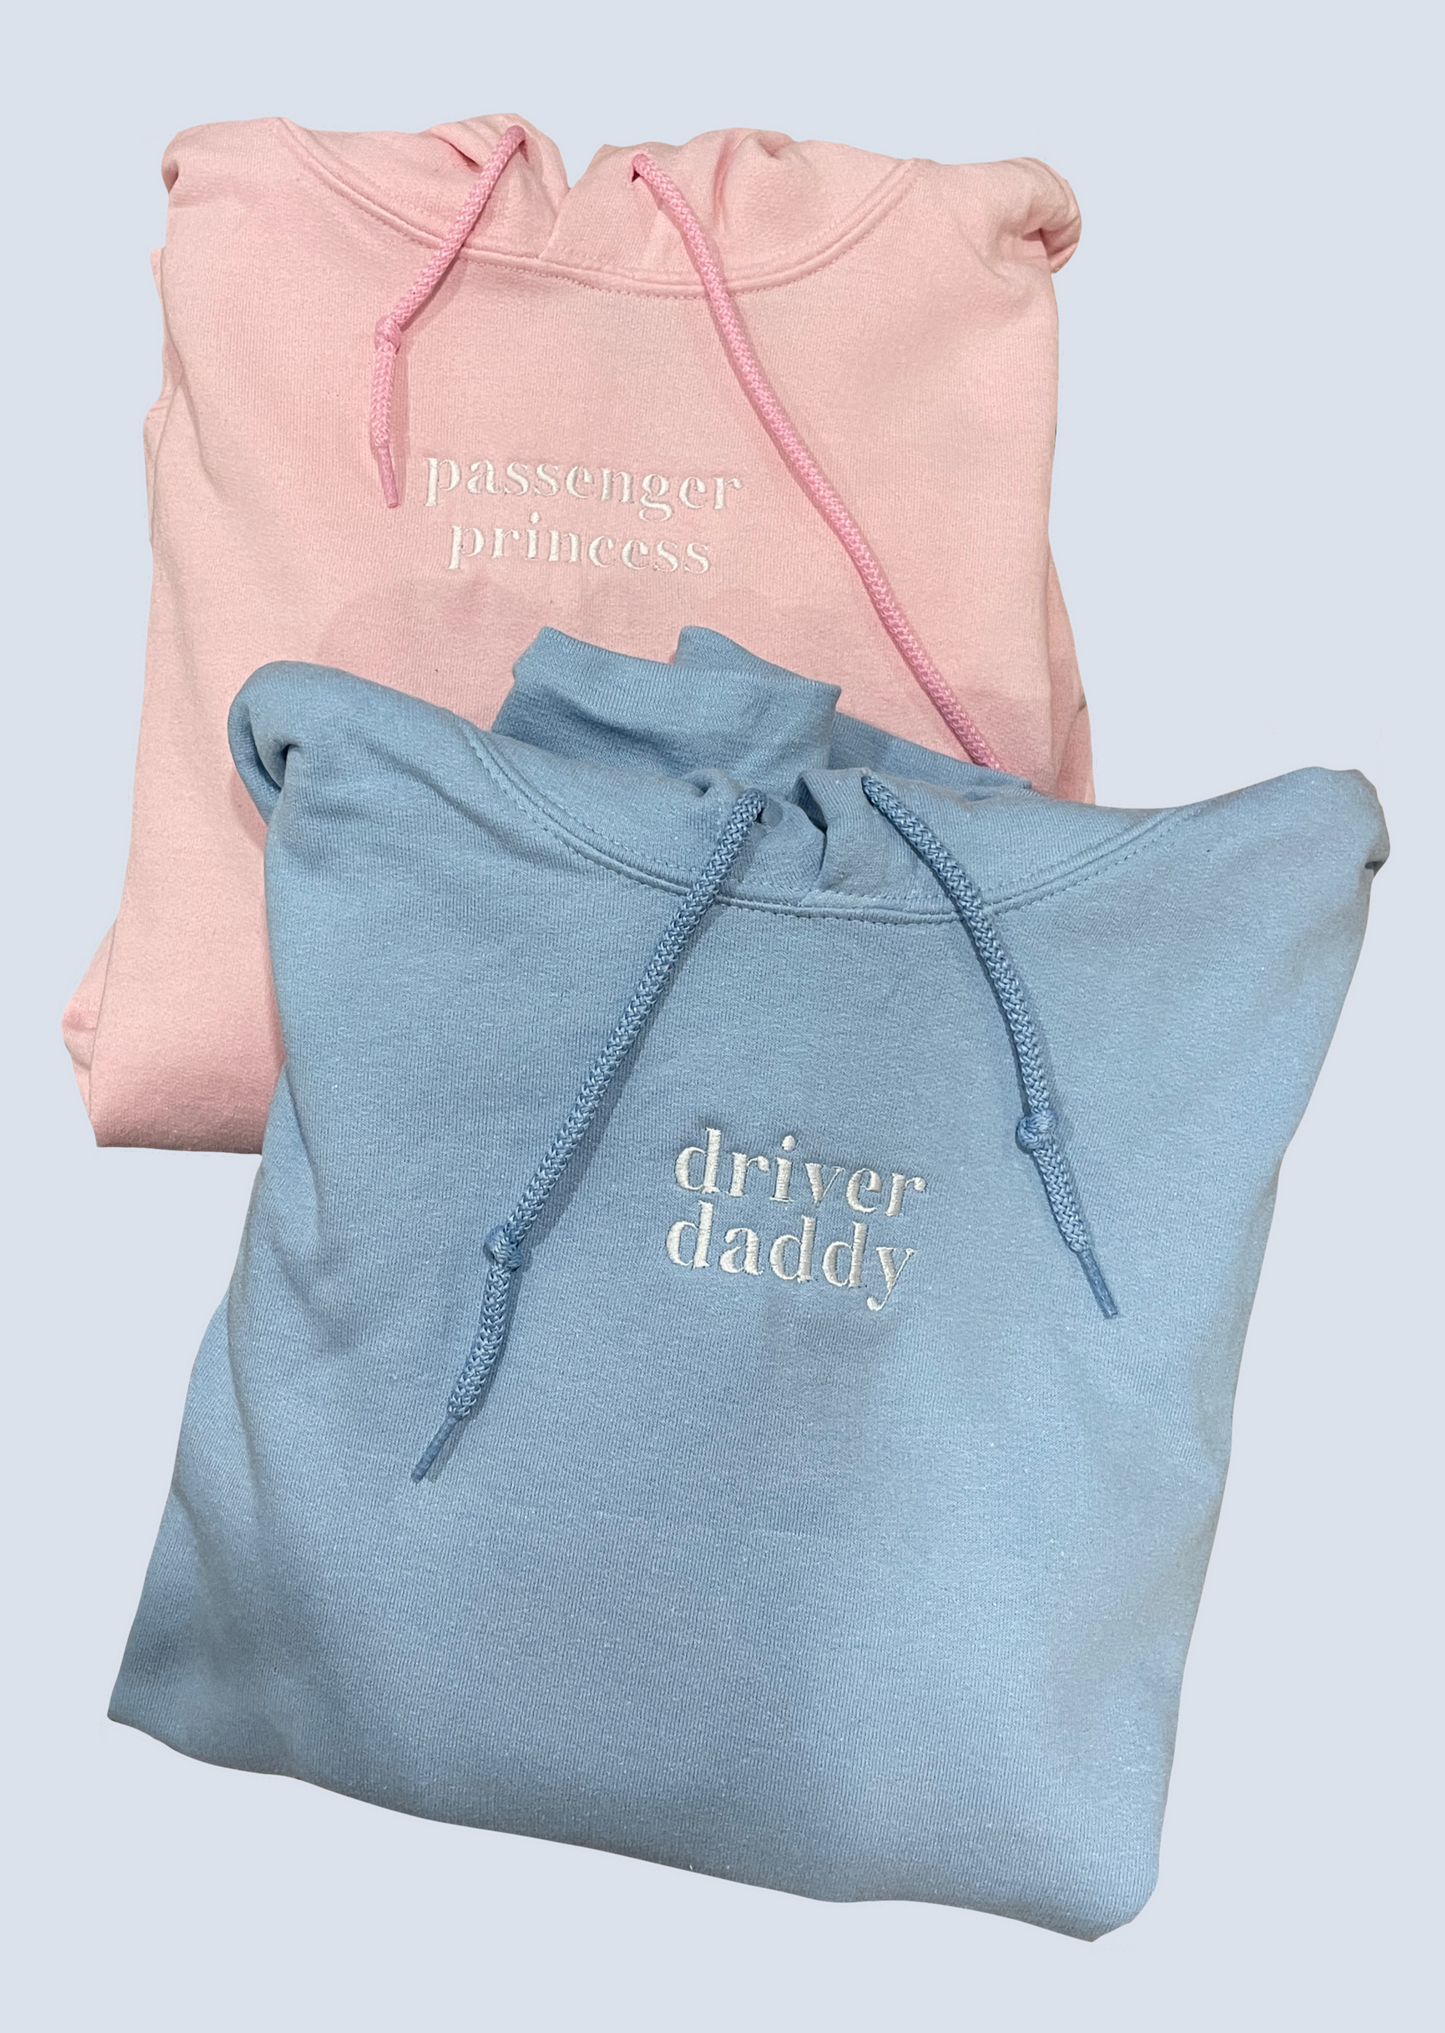 "Passenger Princess" and "Driver Daddy" Embroidered Matching Set